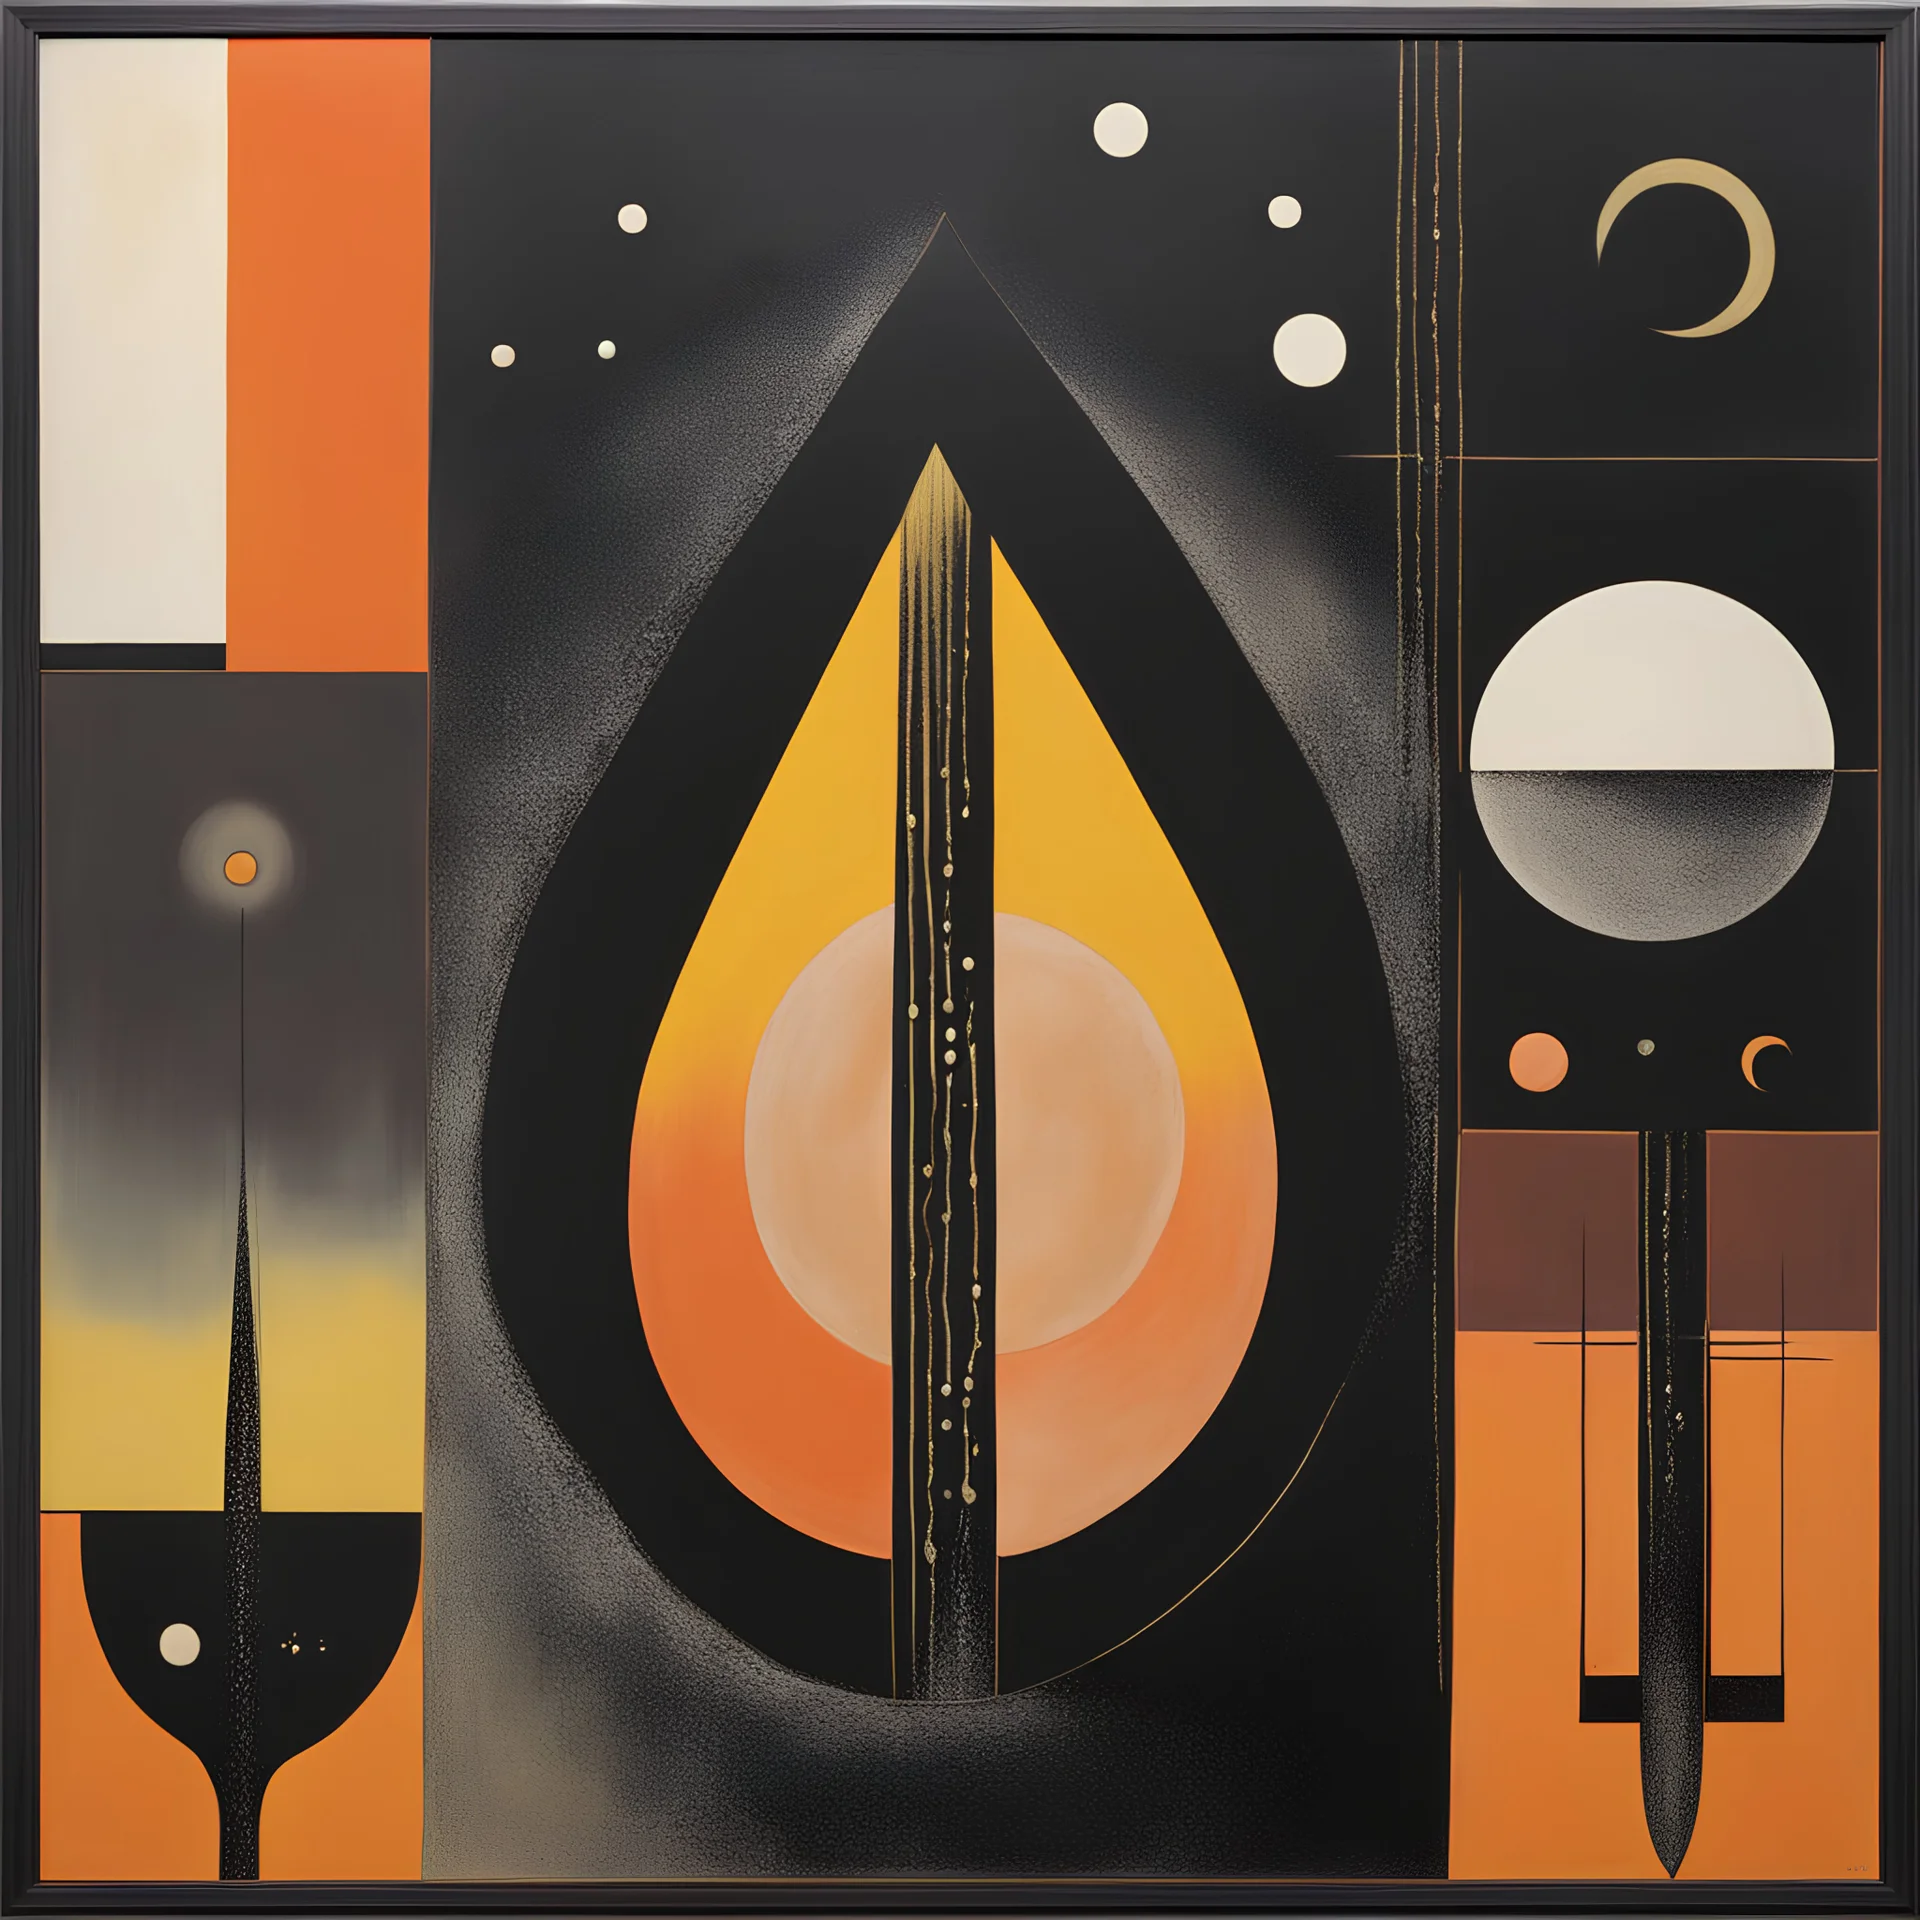 Braille art, abstract surrealism, by Graham Sutherland and Colin McCahon, silkscreened mind-bending illustration; album cover art, asymmetric, Braille language glyphs, warm colors, acid dark shine burn, by Kay Sage, color splash, geometric shapes guided by N(t)=N0​⋅e−kt